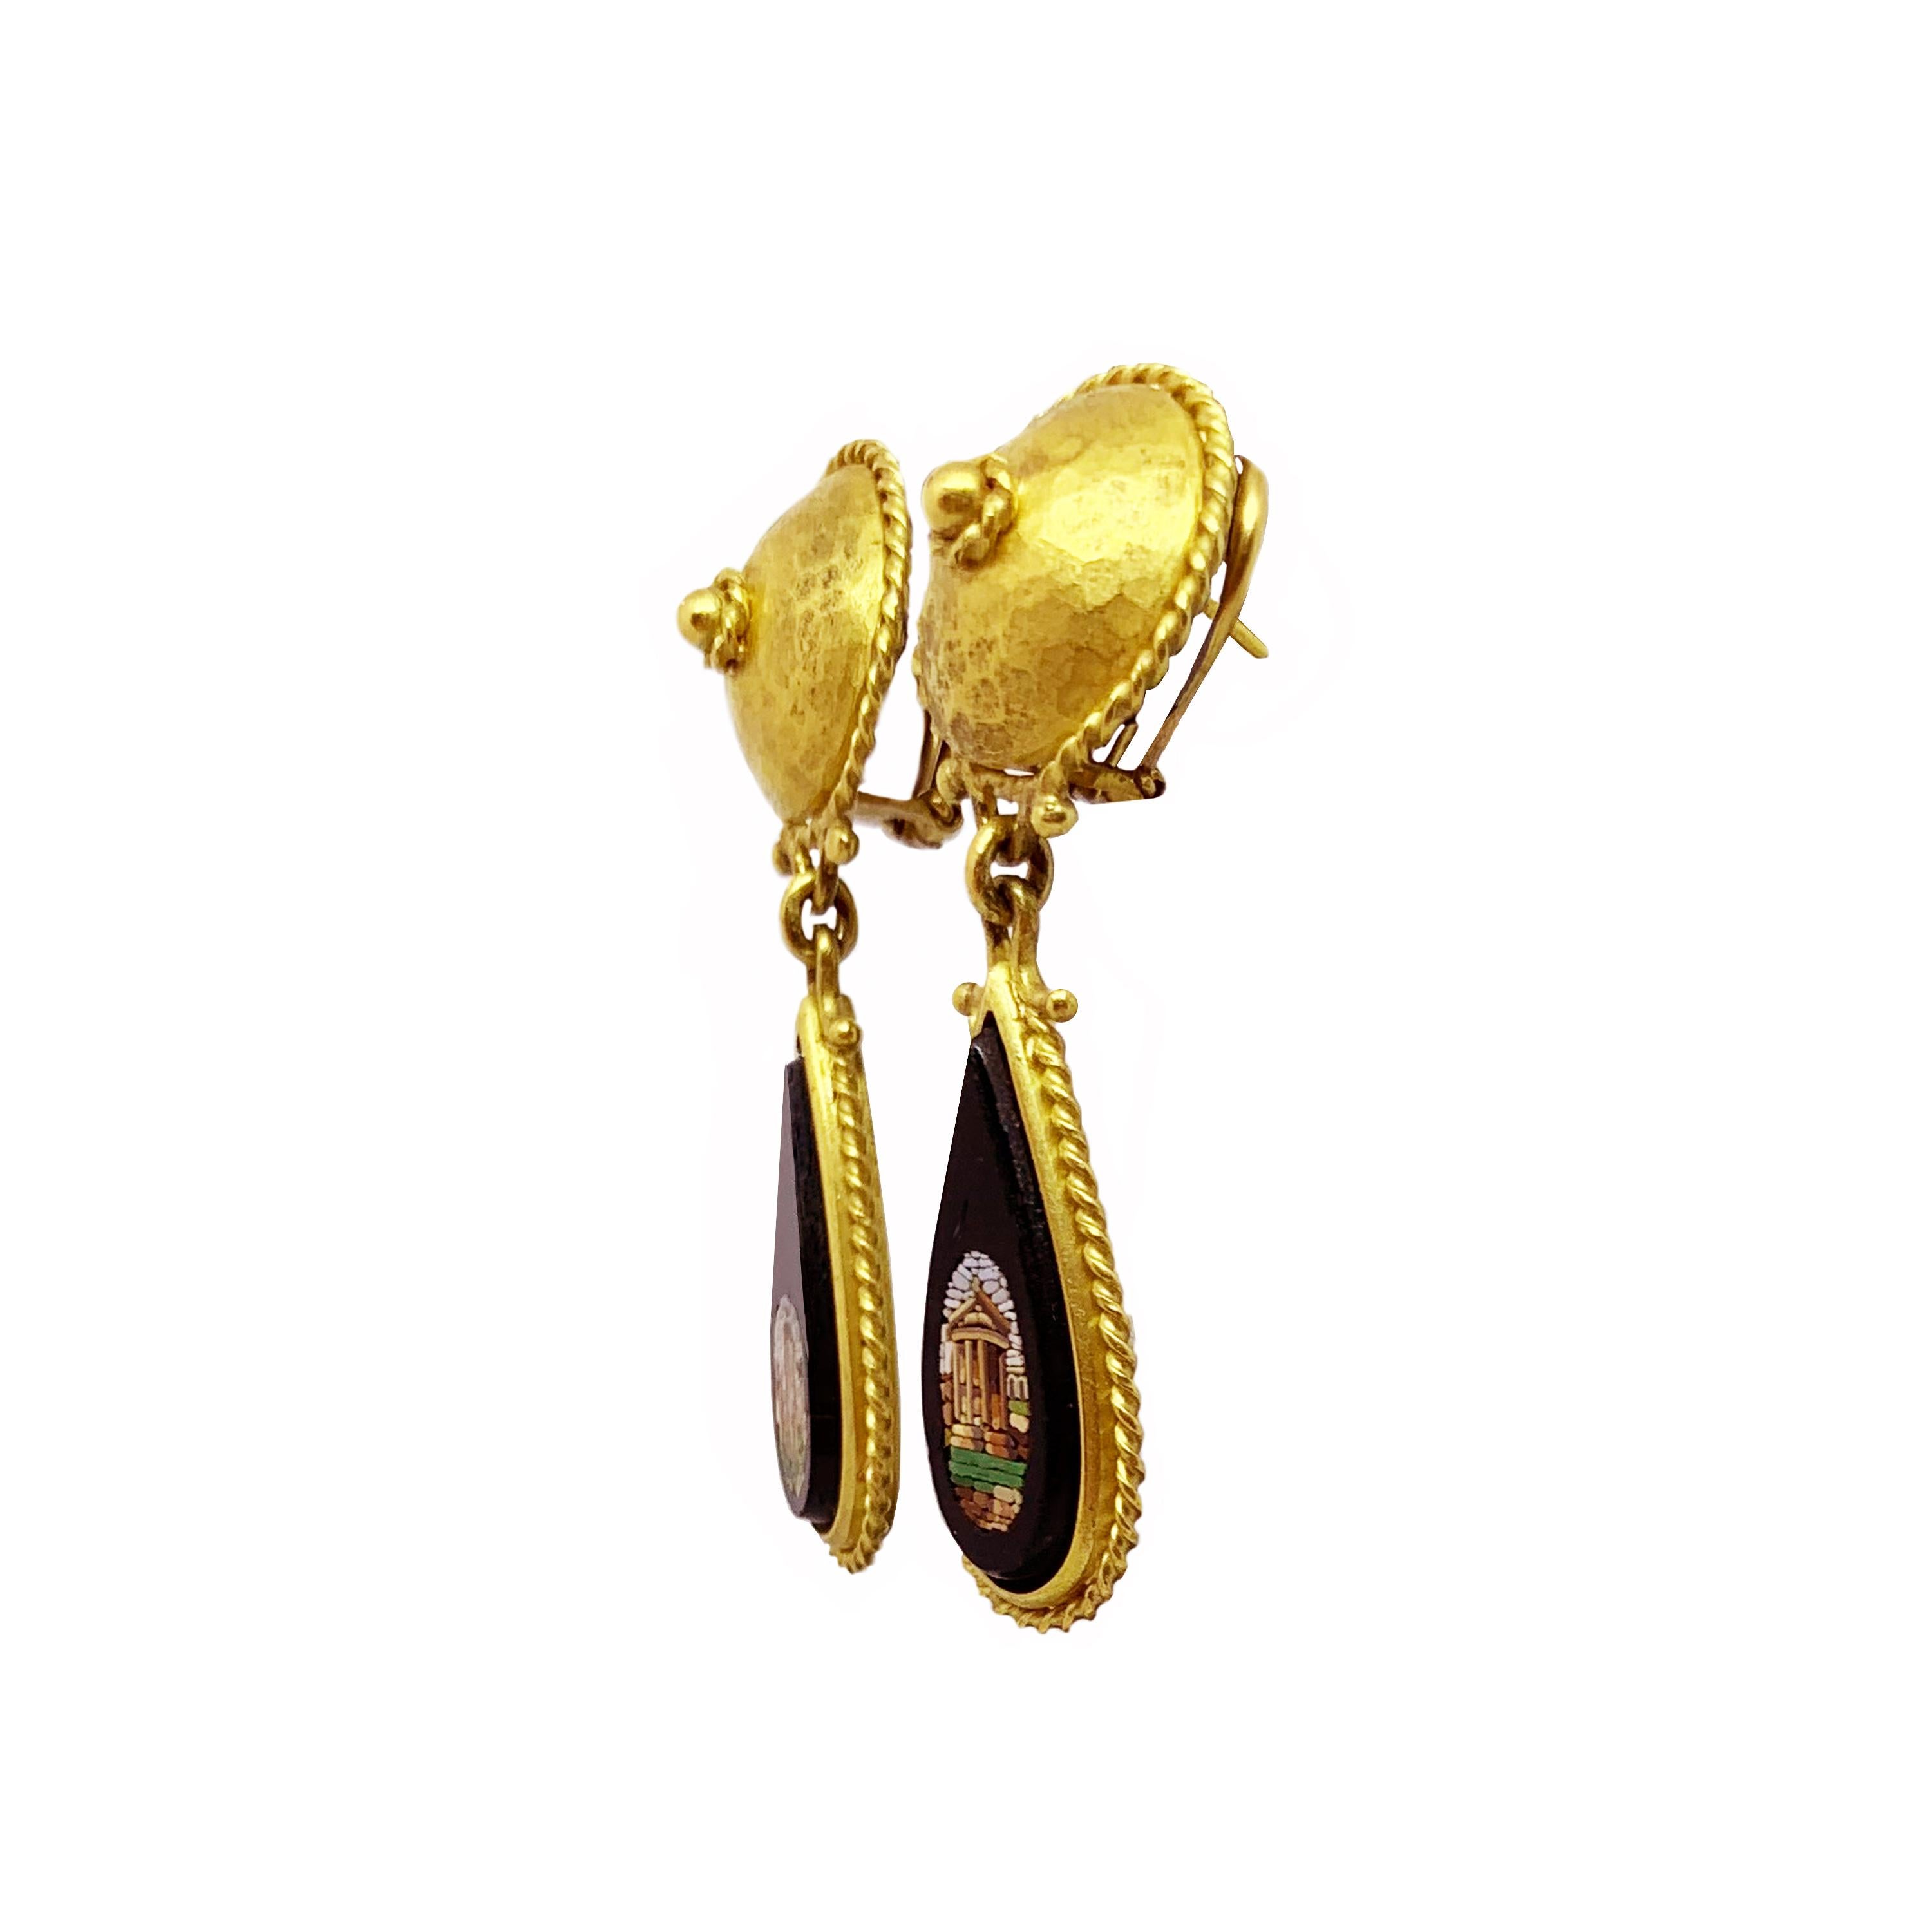 These 18 Kt gold and micromosaic earrings (mid 19th century) depict the Roman Forum and the Temple of Vesta.
The micromosaics come from the Vatican Mosaic Studio that started up in 1727. Here the best mosaic artists that Rome boasted poured into.